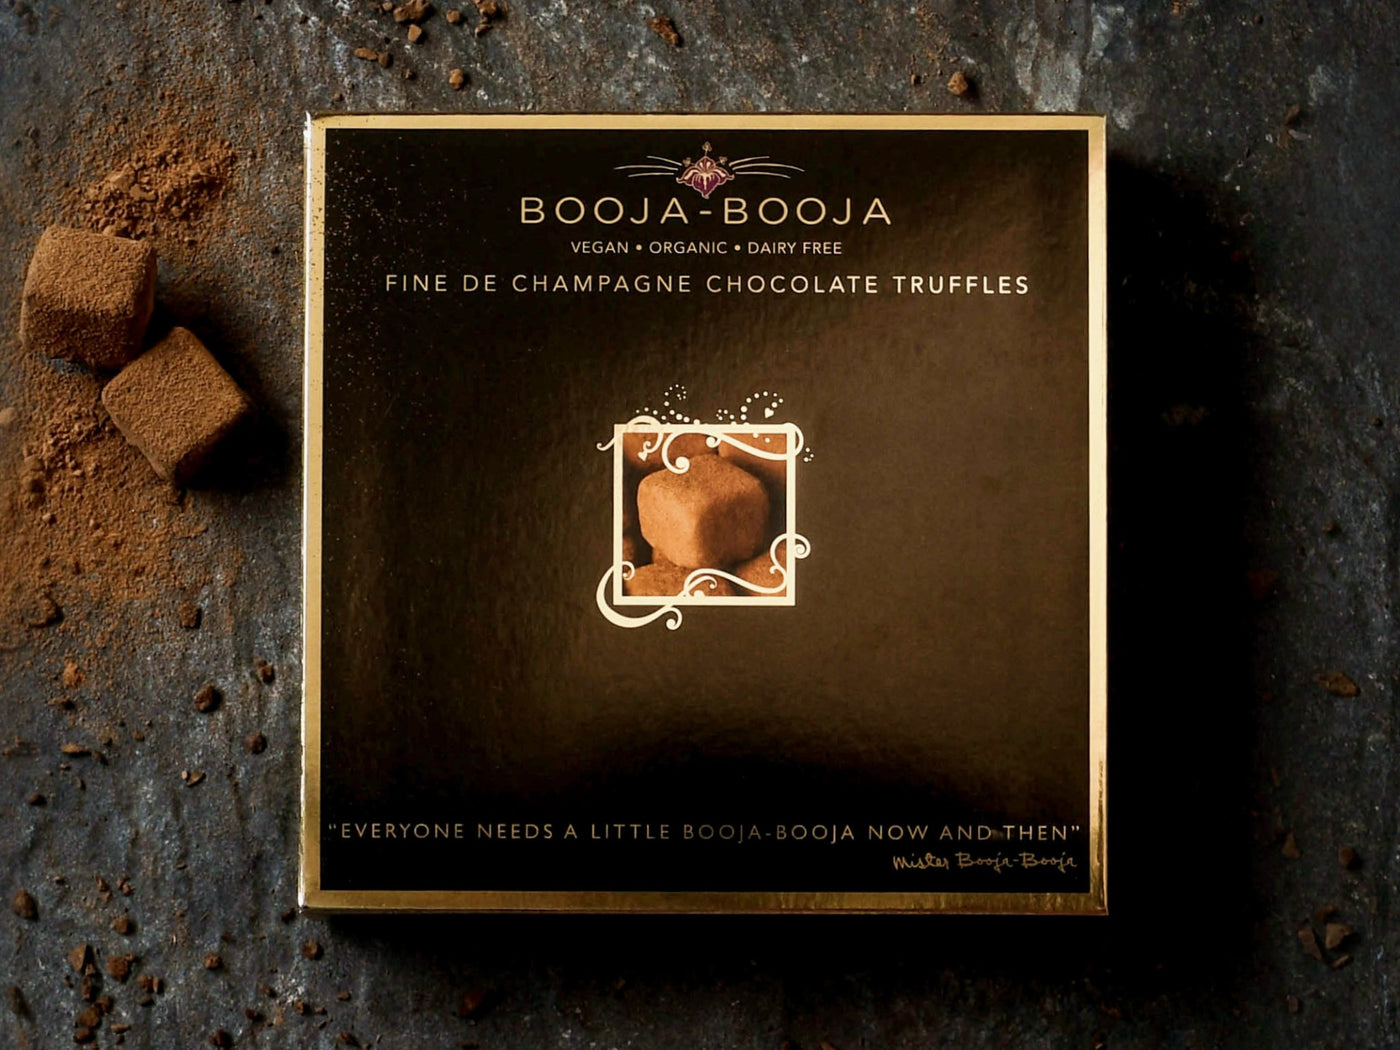 The Booja-Booja Fine De Champagne 138g gift box, photographed on a slate background with loose truffles around